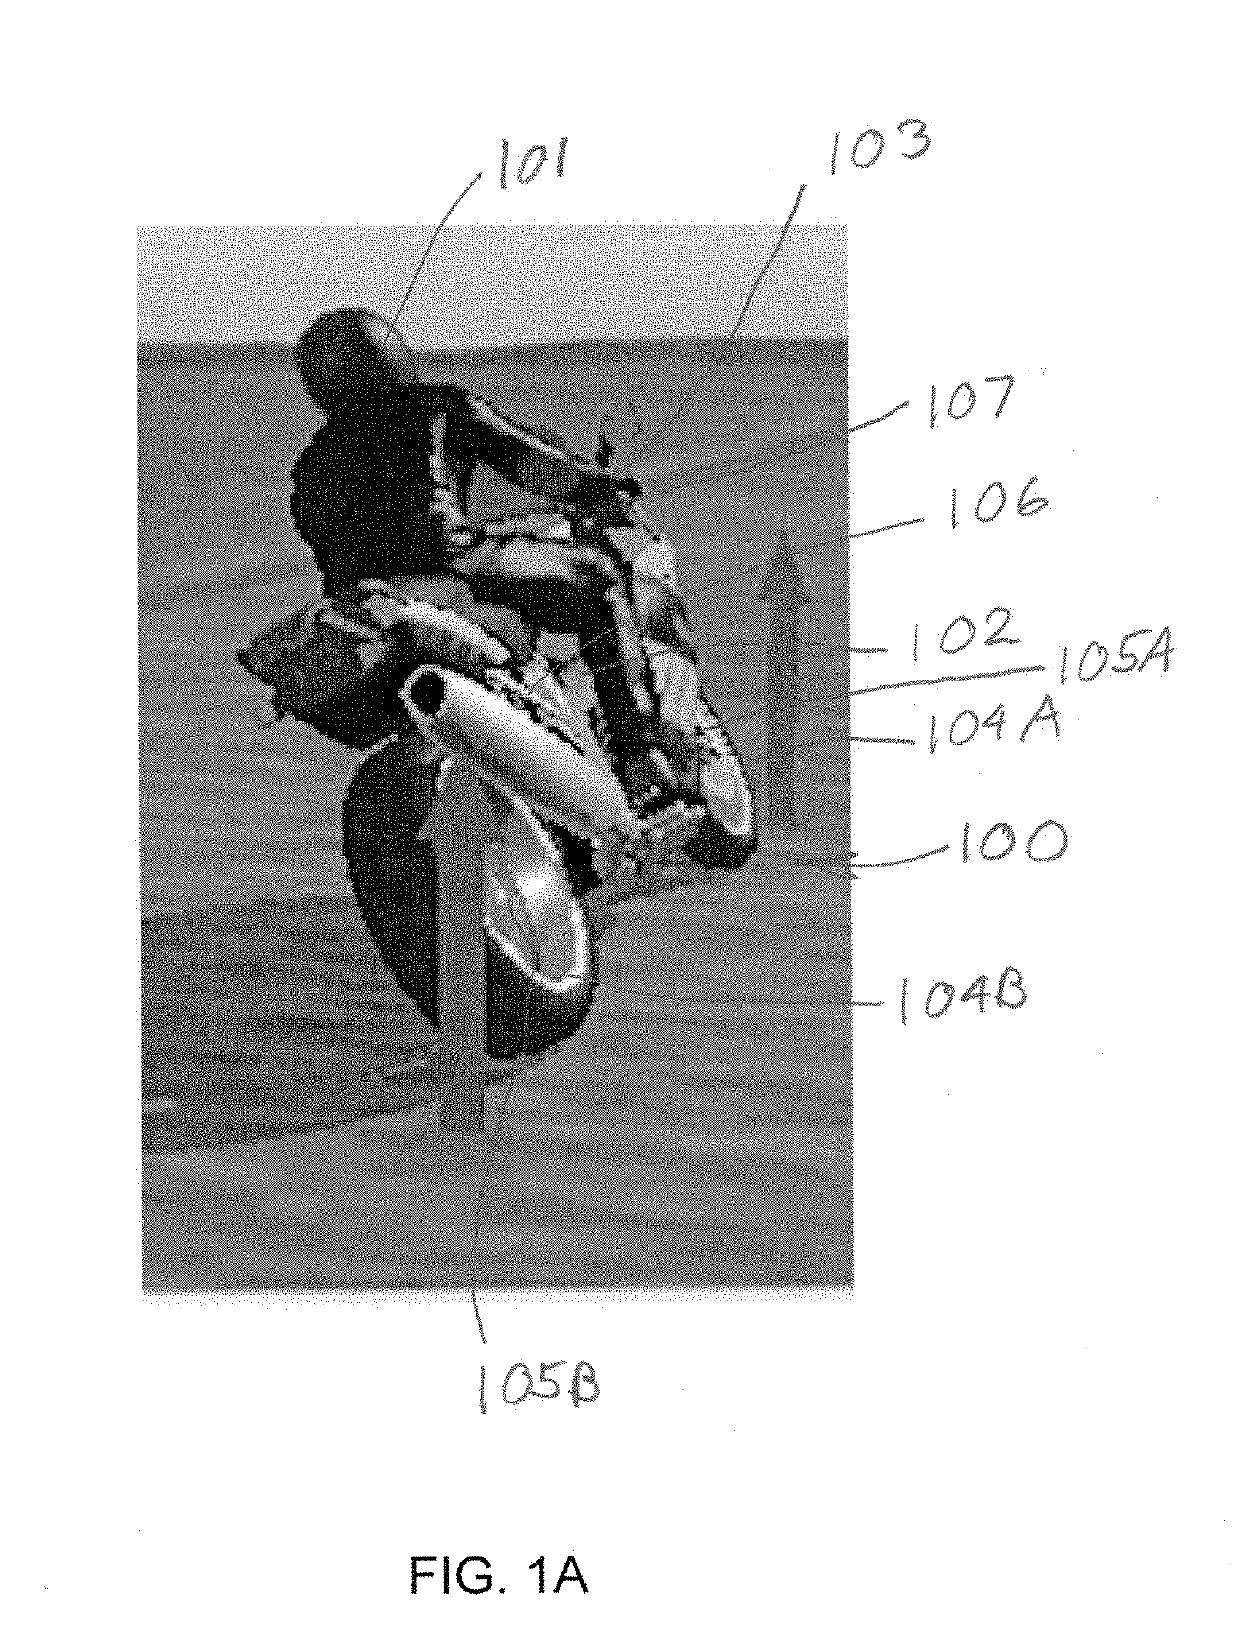 System and method to stabilize motorcycles